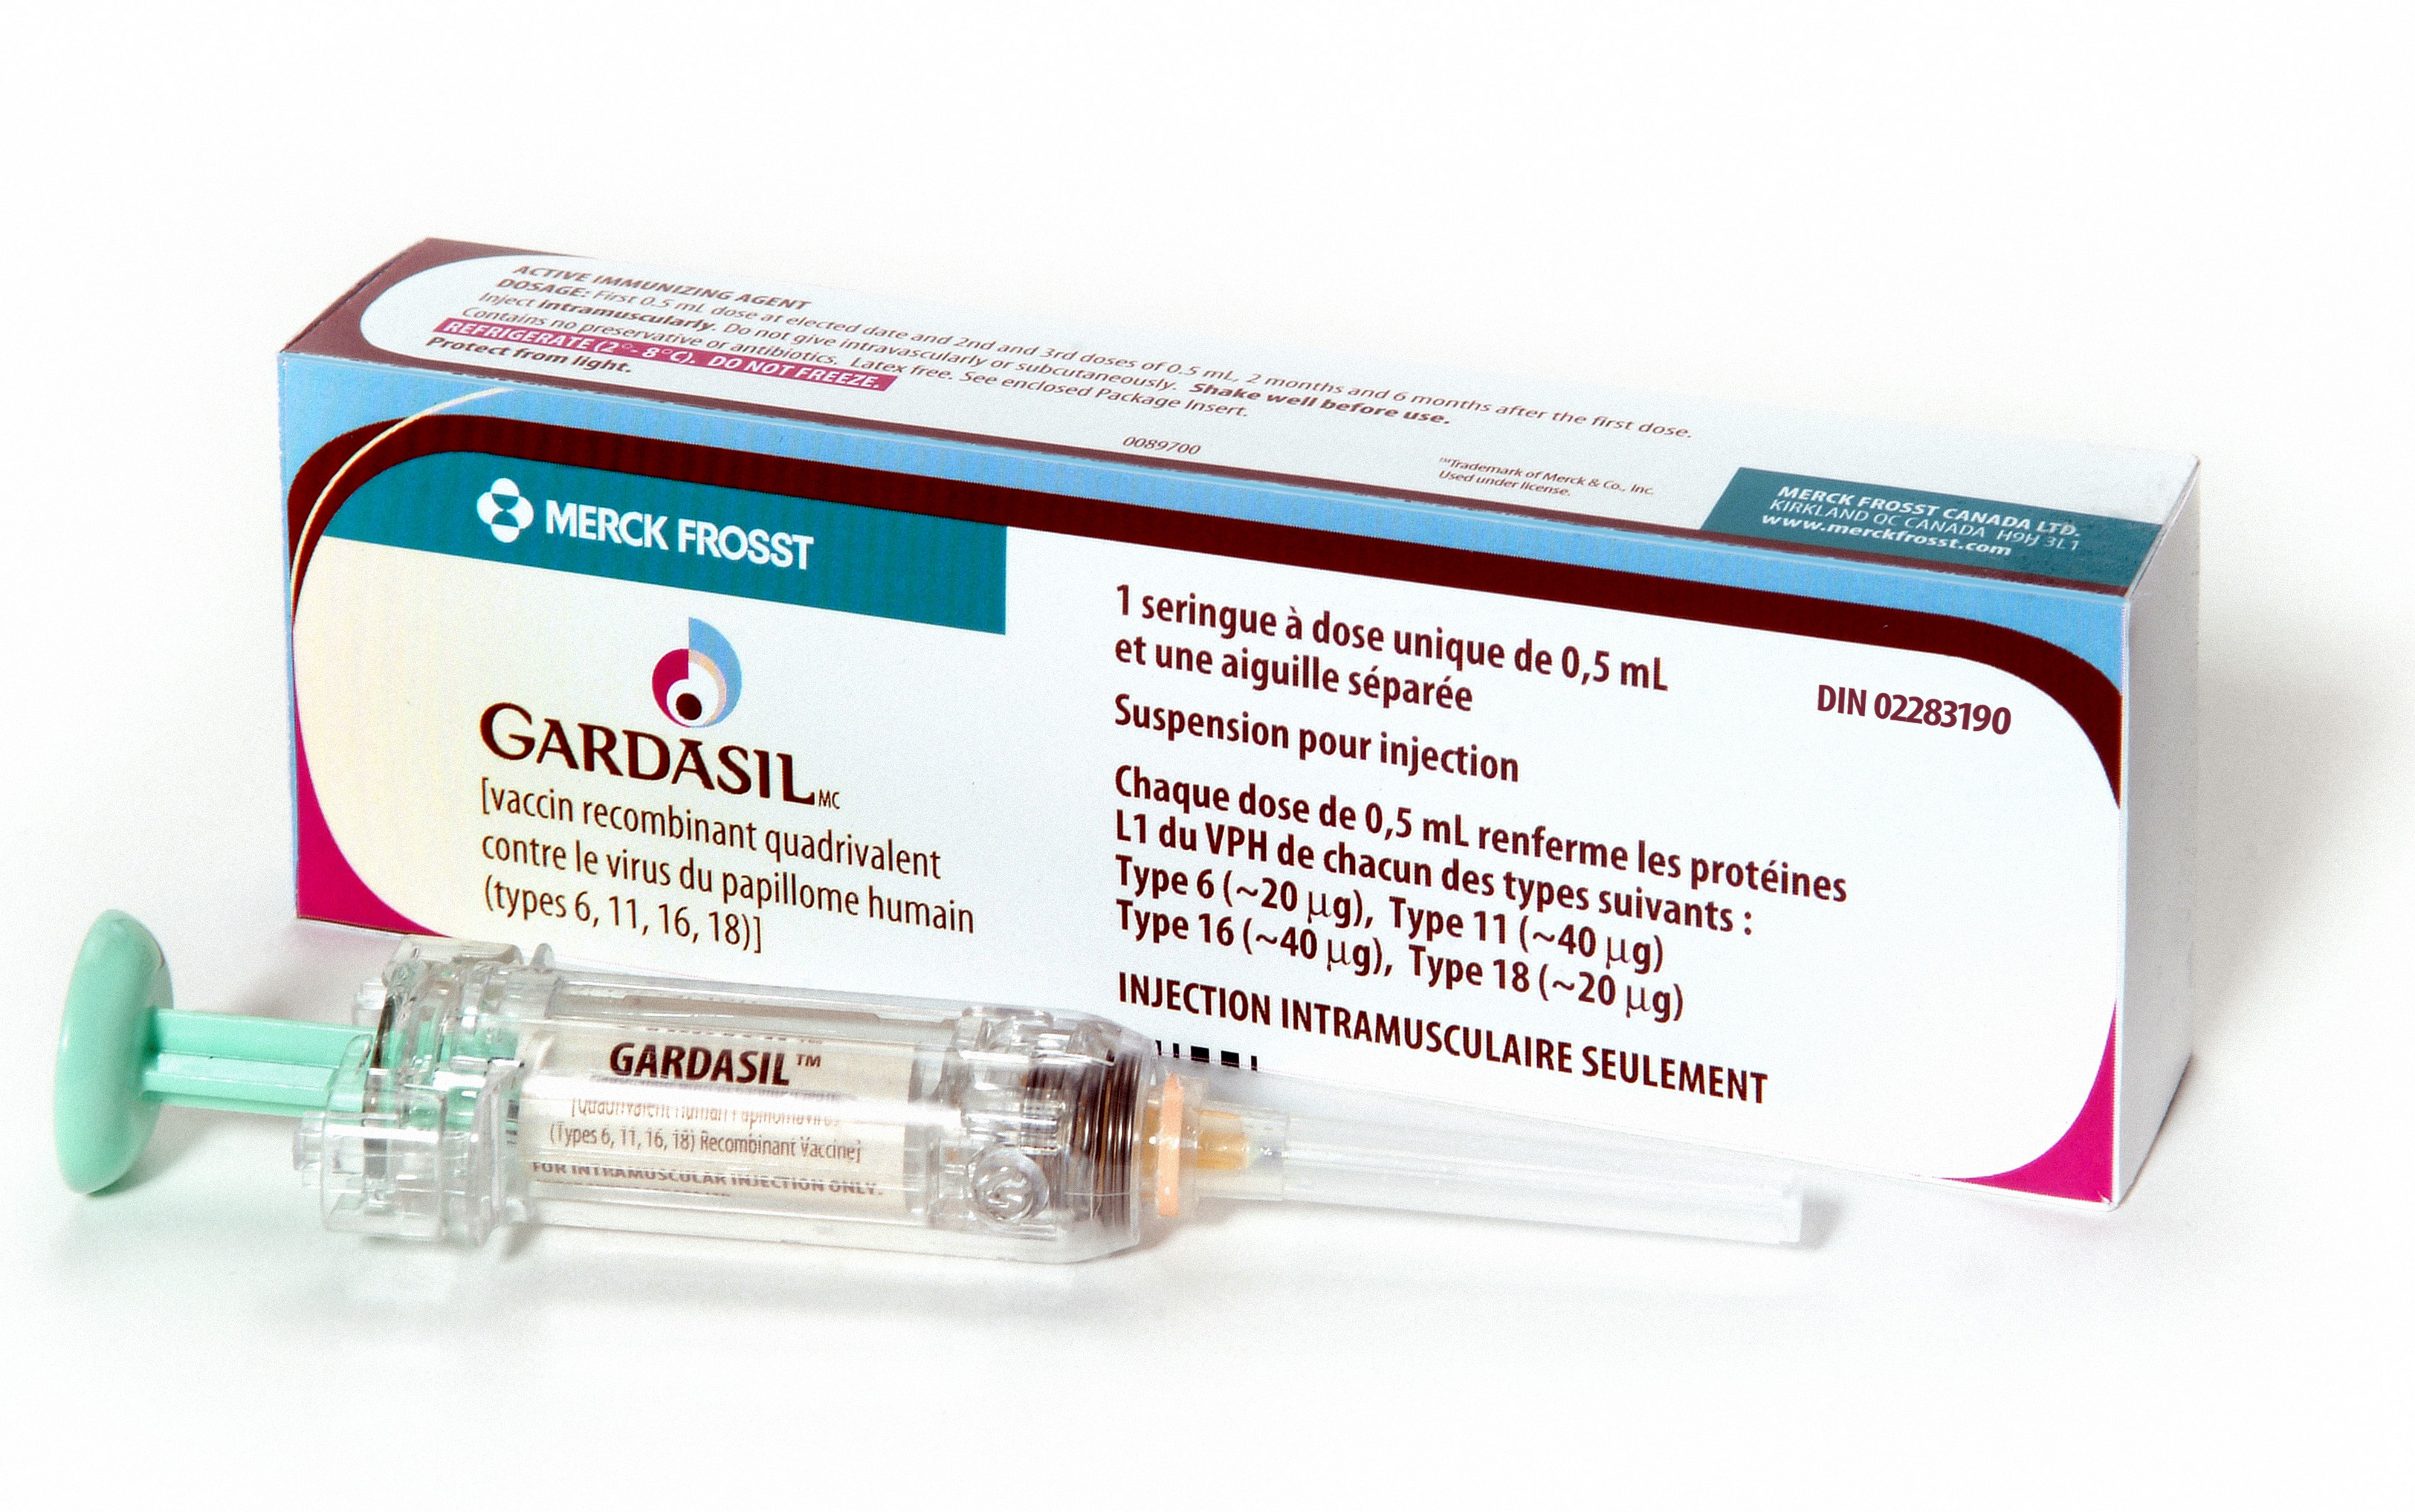 The FDA approves Gardasil, a vaccine that protects against human papillomavirus (HPV). HPV is known to be the major cause of cervical cancer.121aju, Tonce N. K. "The Nobel Chronicles." The Lancet. 352 (1998): 1635. [PUBMED]                      2Machtens, S., et al. "The History of Endocrine Therapy of Benign and Malignant Diseases of the Prostate." World Journal of Urology. 18 (2000): 222-226. [PUBMED]      